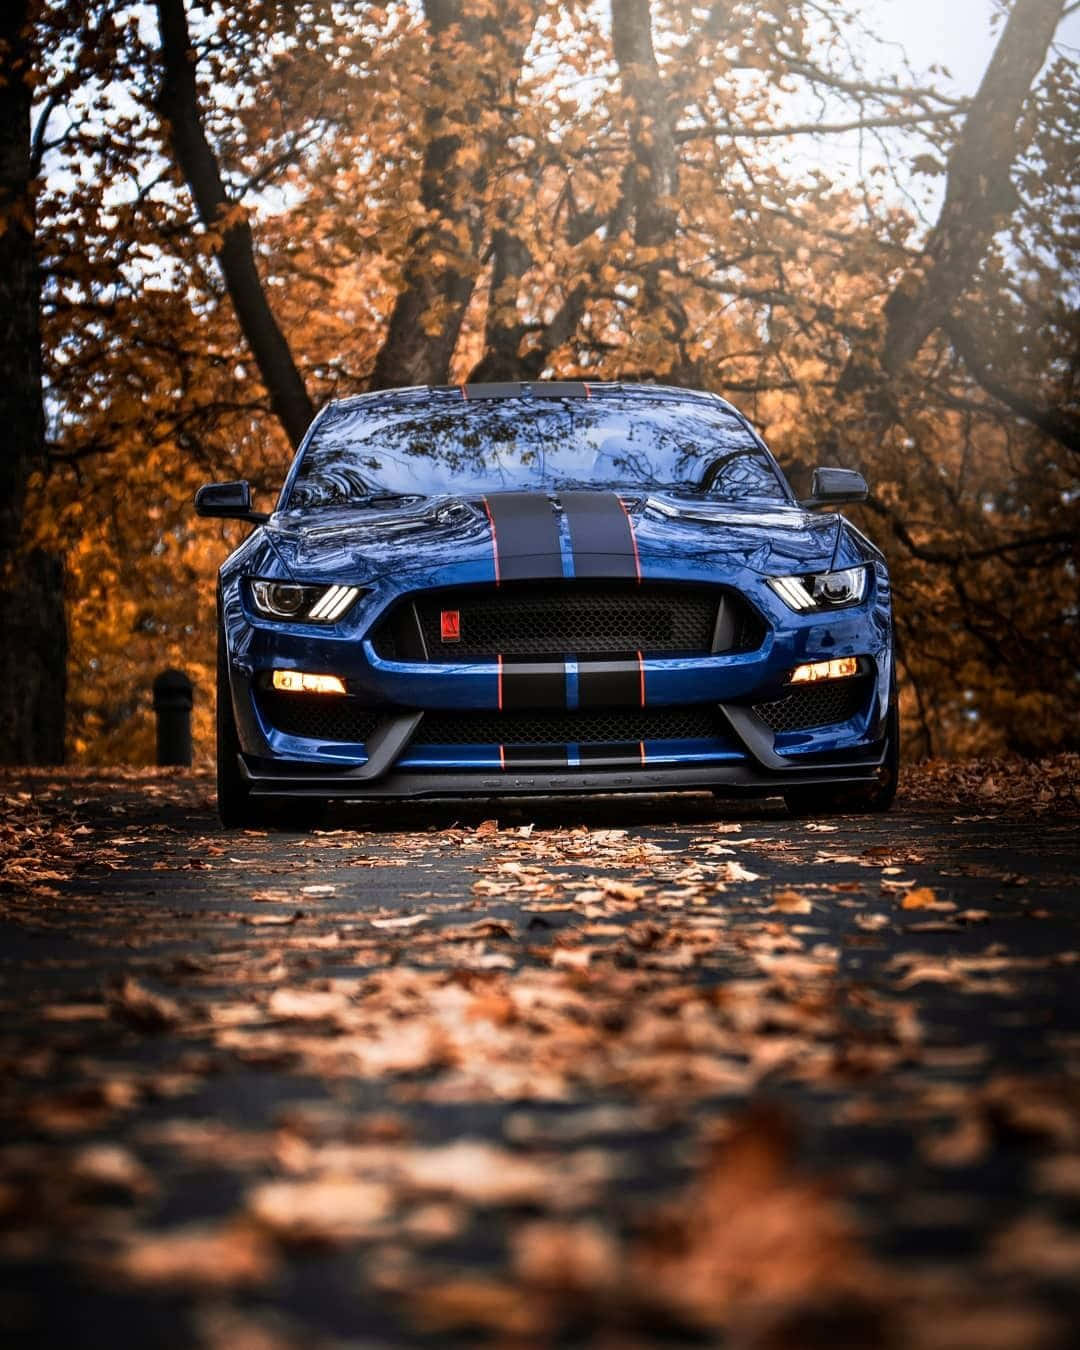 Mighty Elegance: Ford Mustang Gt350r On The Move Wallpaper